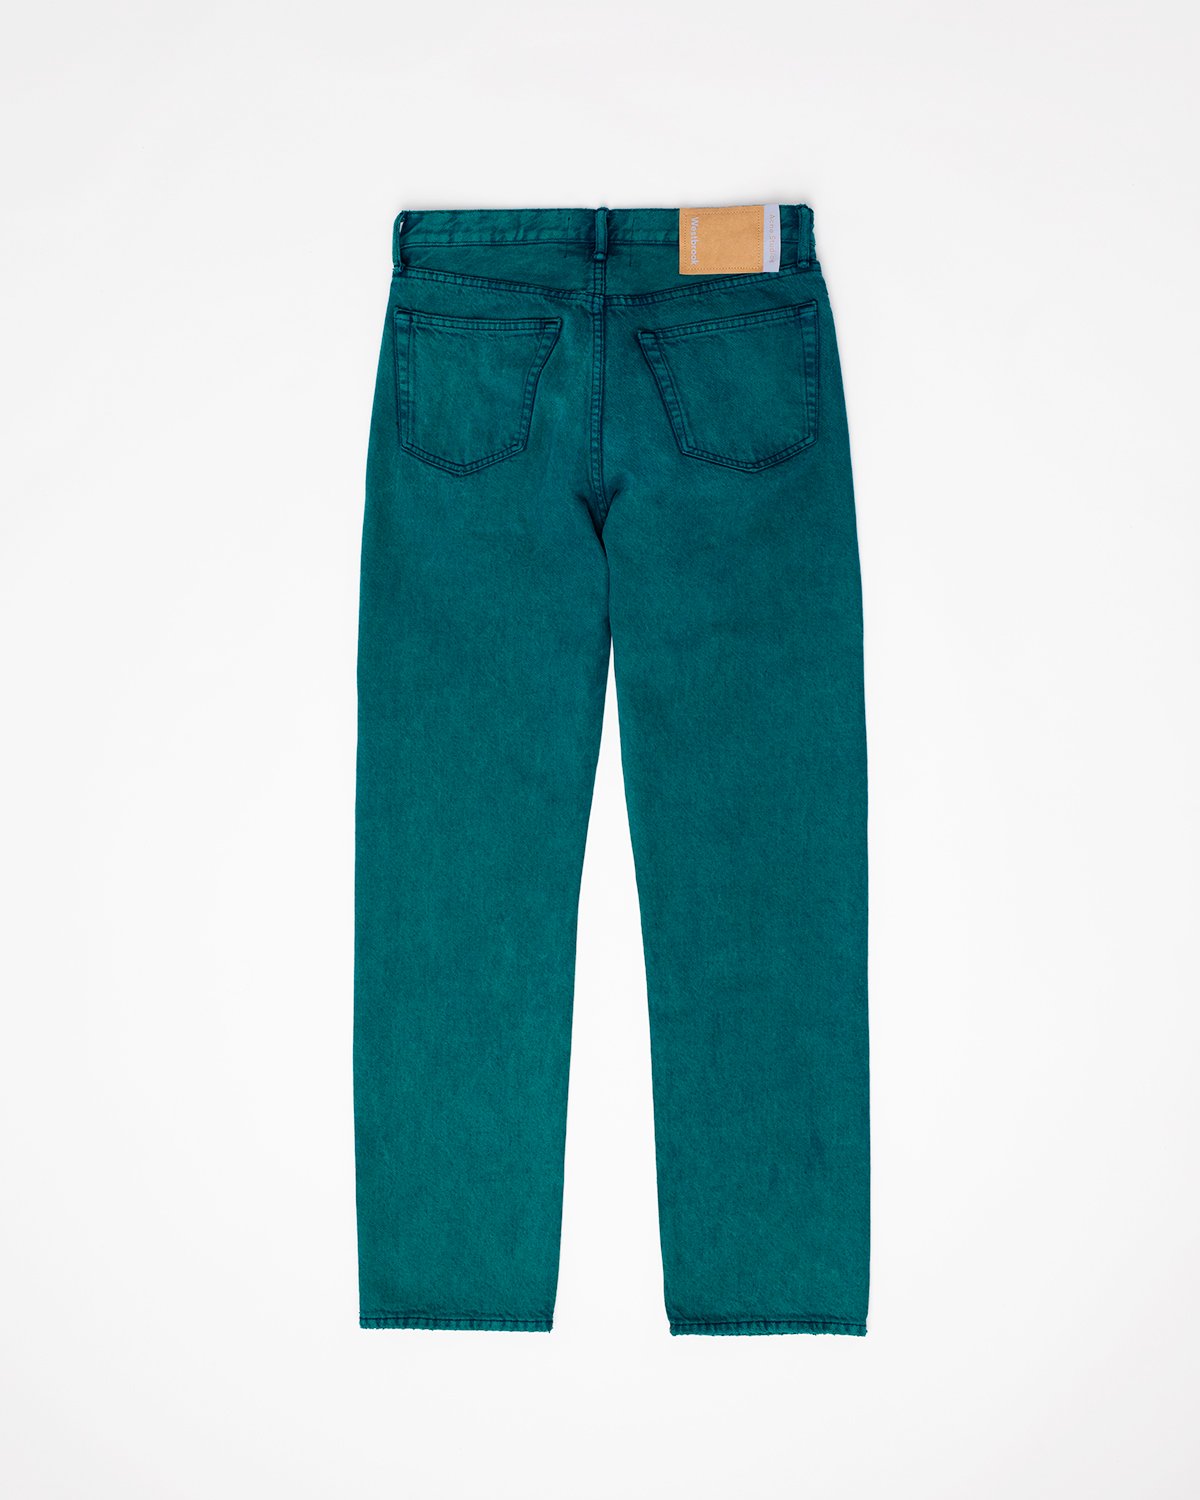 Acne Studios - Overdyed Jeans Jade Green - Clothing - Green - Image 2